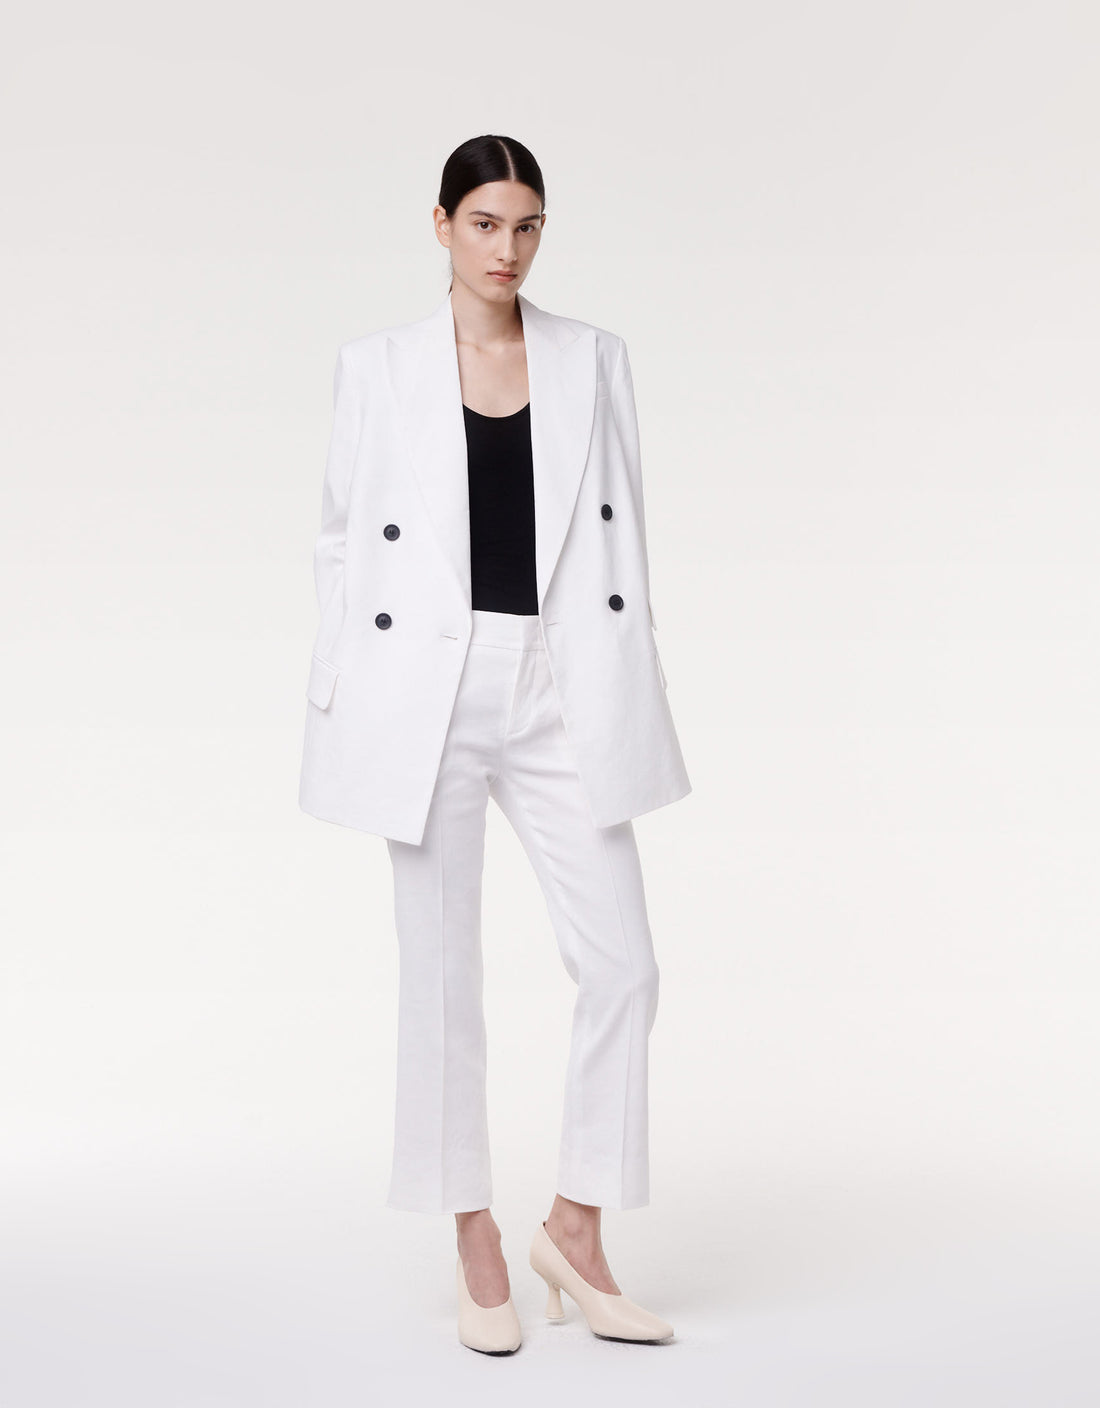 （white）Autumn Winter B Suit Female New Double Breasted Pocket Women Long